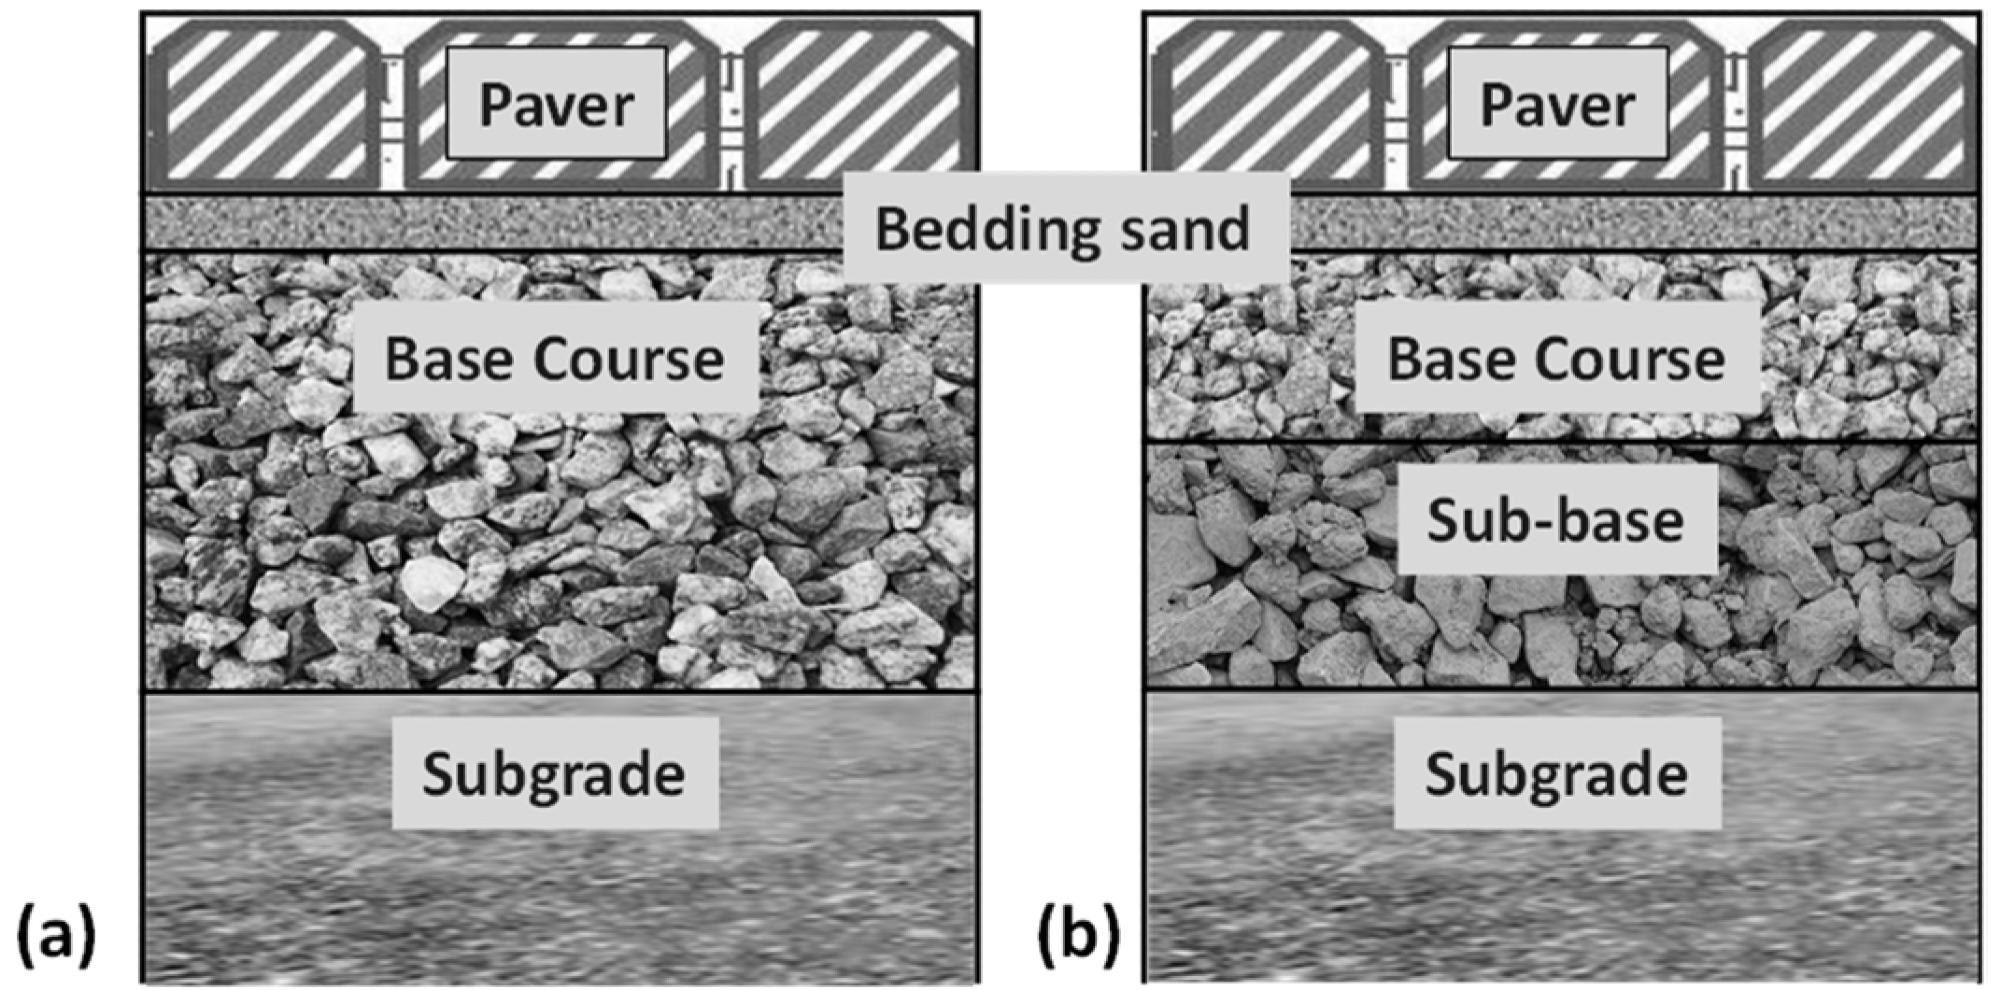 Typical permeable pavement configuration: (a) pavement containing only a granular base course, (b) pavement containing granular base and sub-base courses.